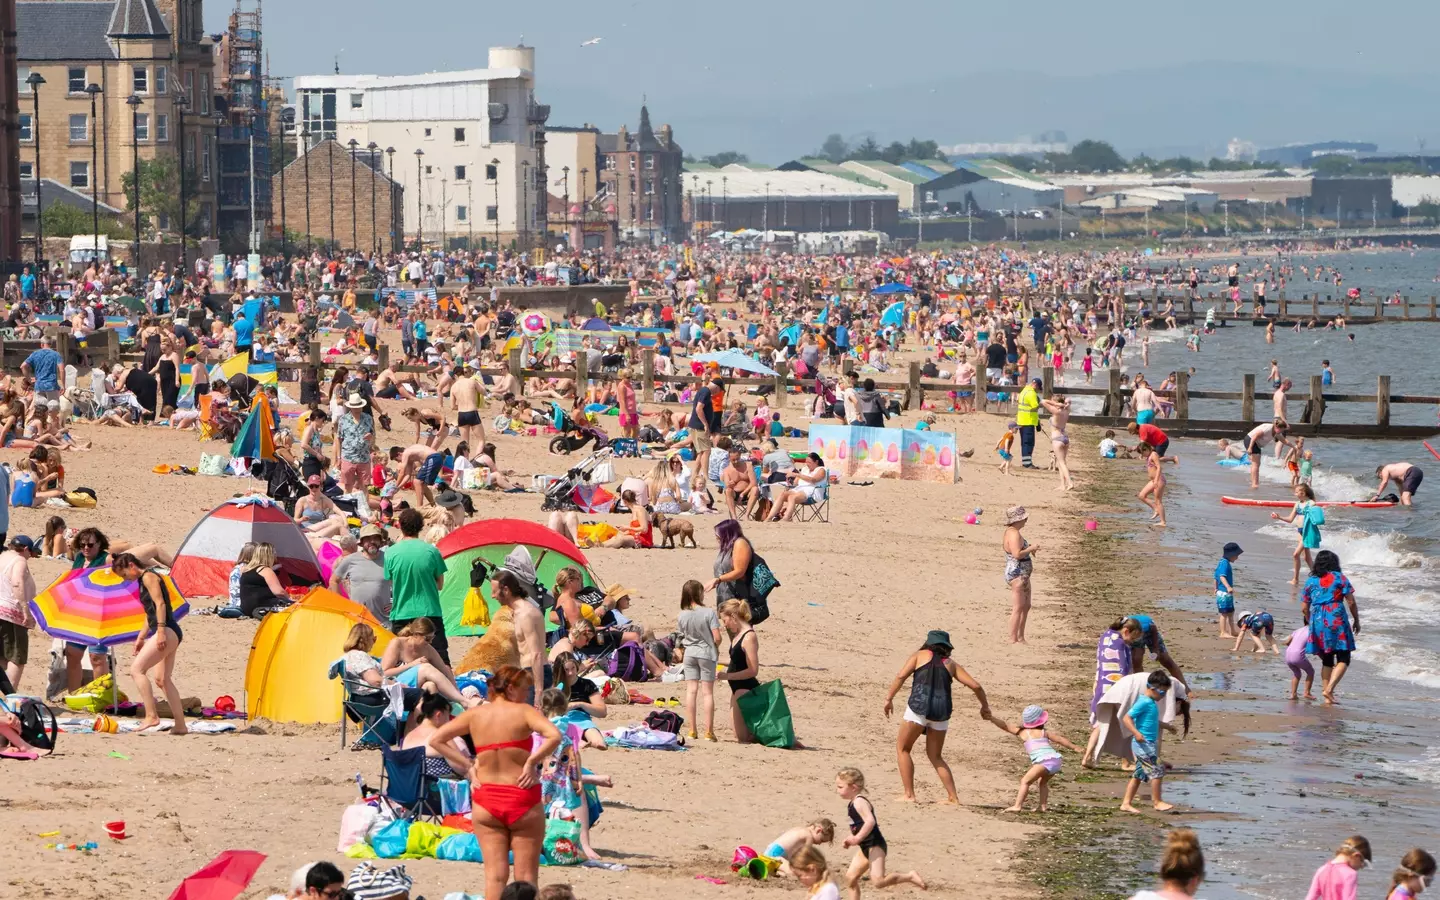 Record temperatures are expected to hit the UK this week.